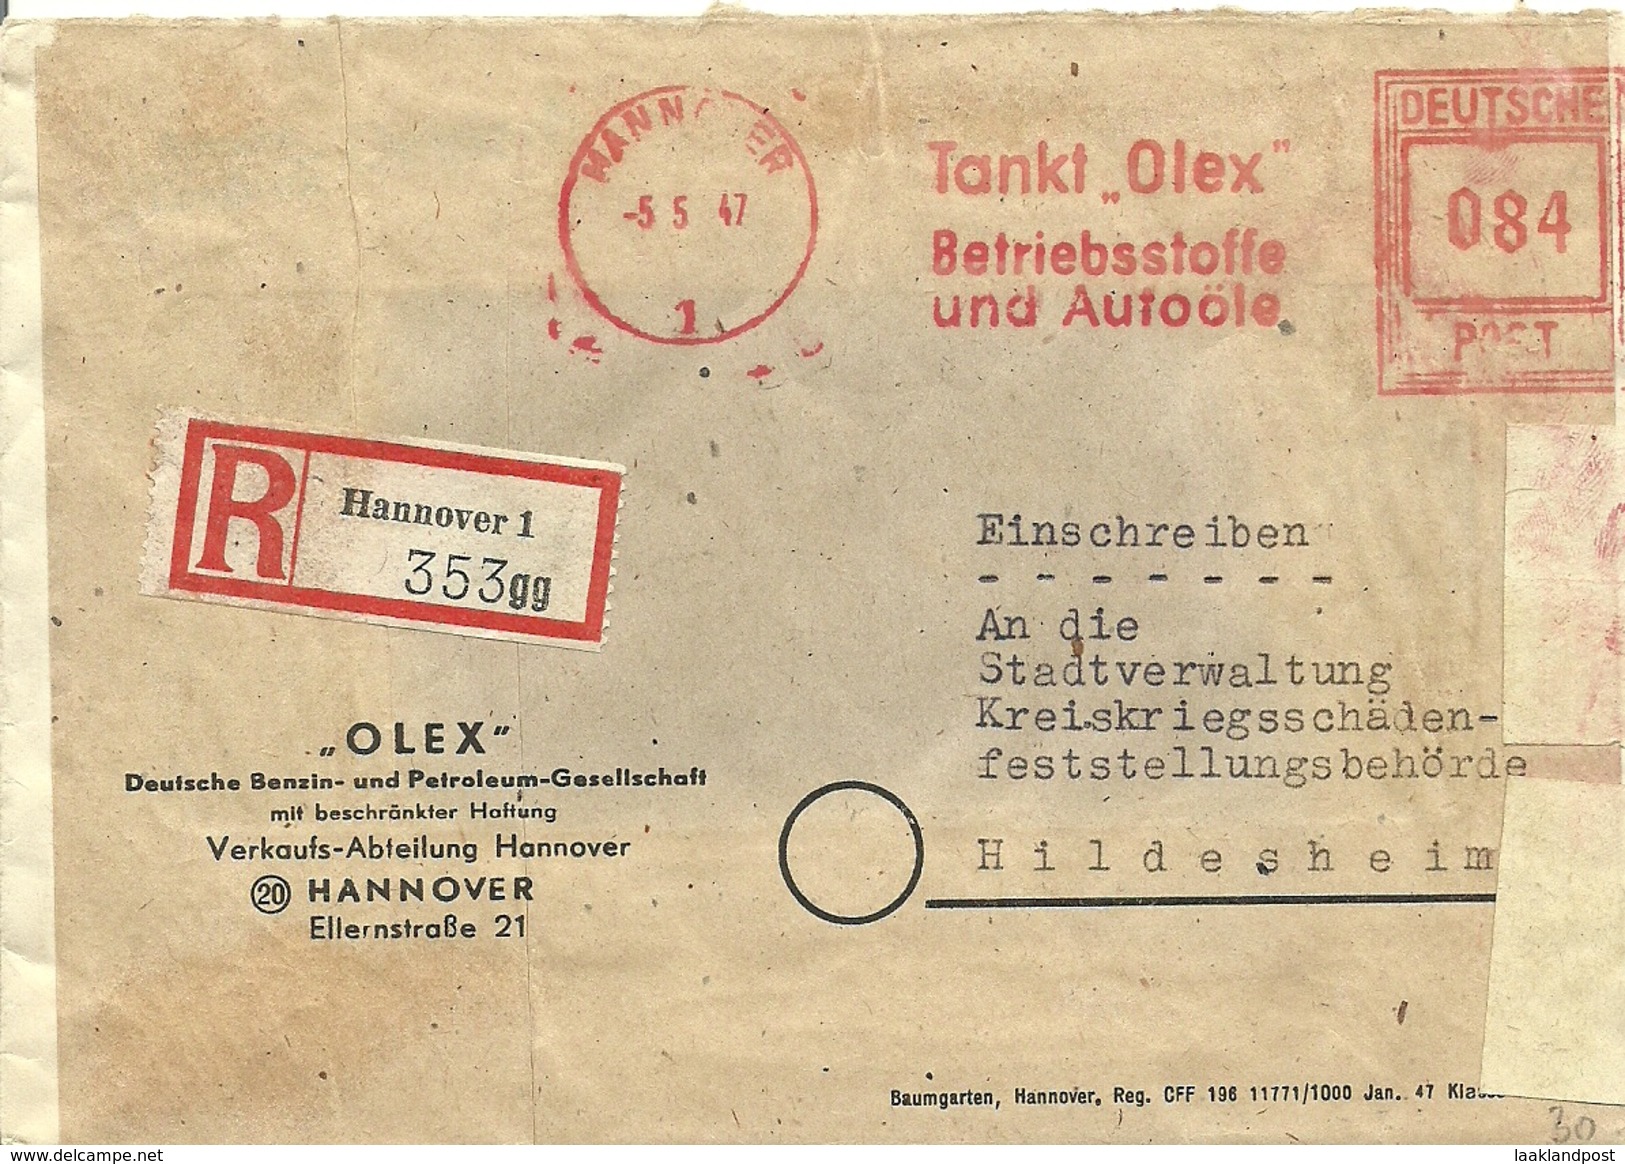 Registered Firmcover Meter Tankt Olex Betriebstoffe Und Autoole, Hannover 5-5-1947 - Auto's